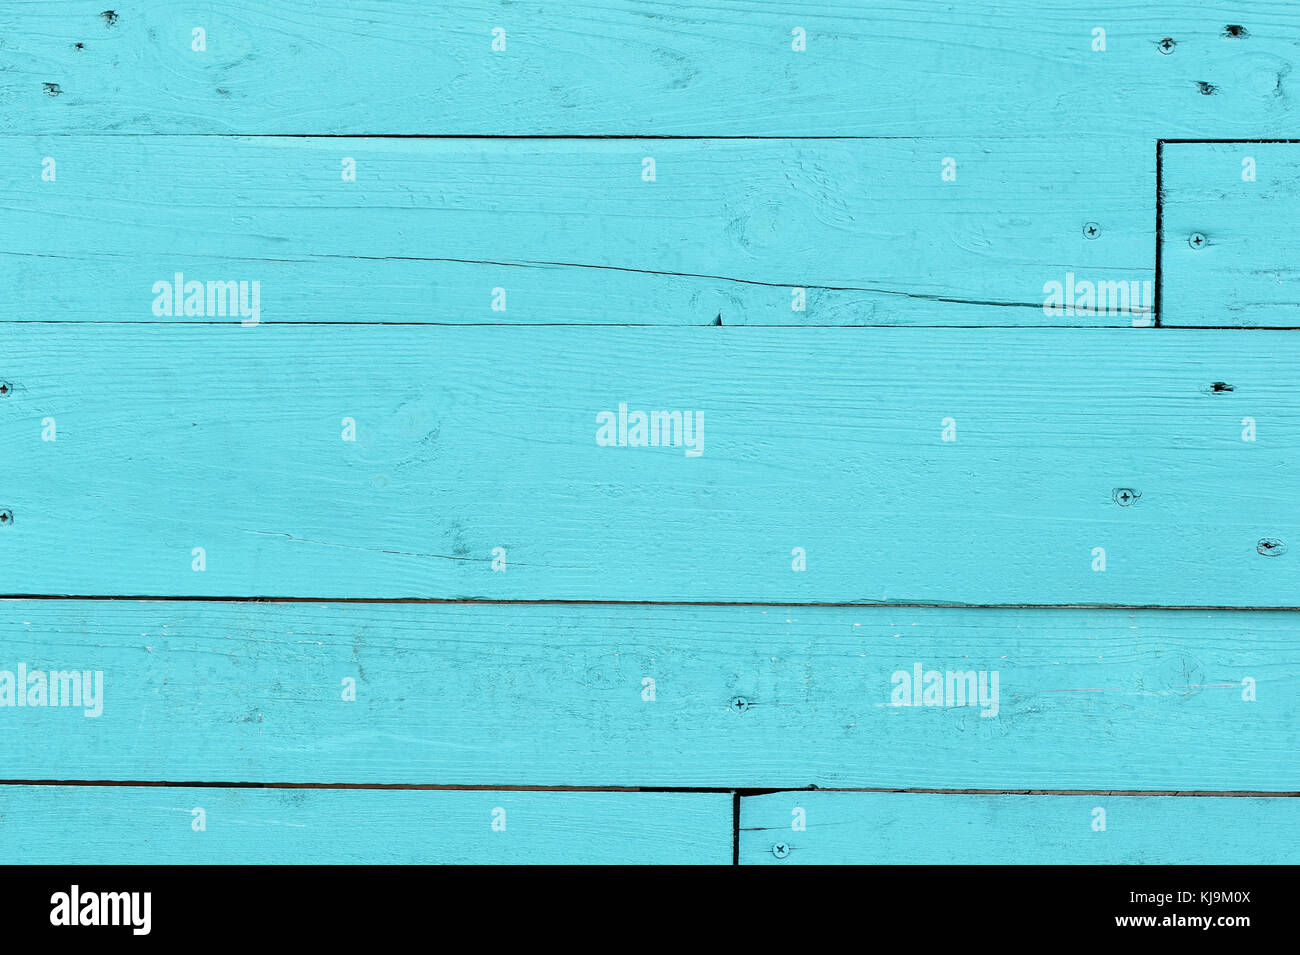 wooden turquoise background, wood texture Stock Photo